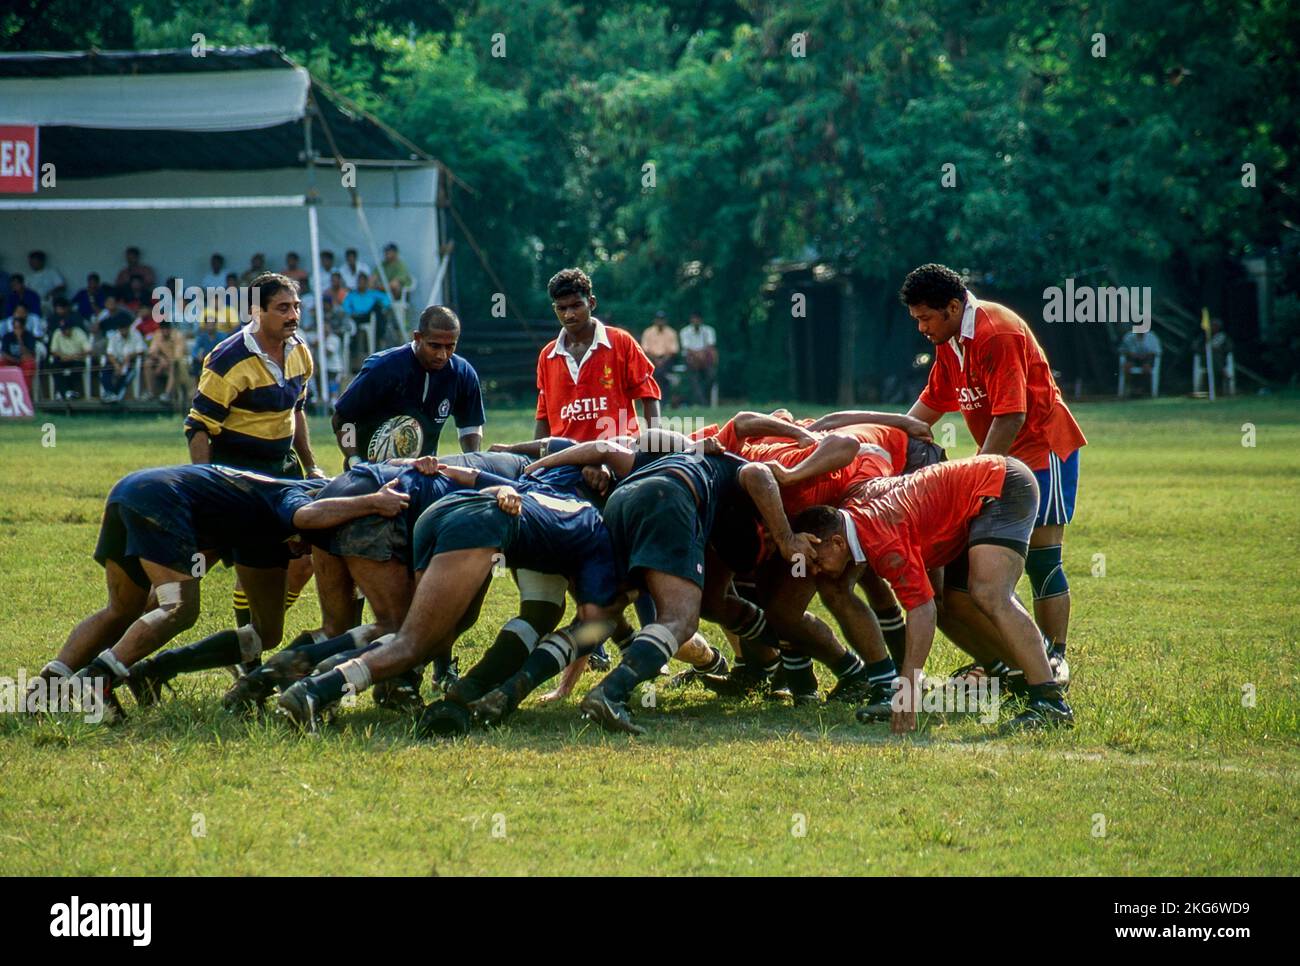 Forceful sport game rugby playing with strength and zest in Mumbai Maharashtra India Stock Photo